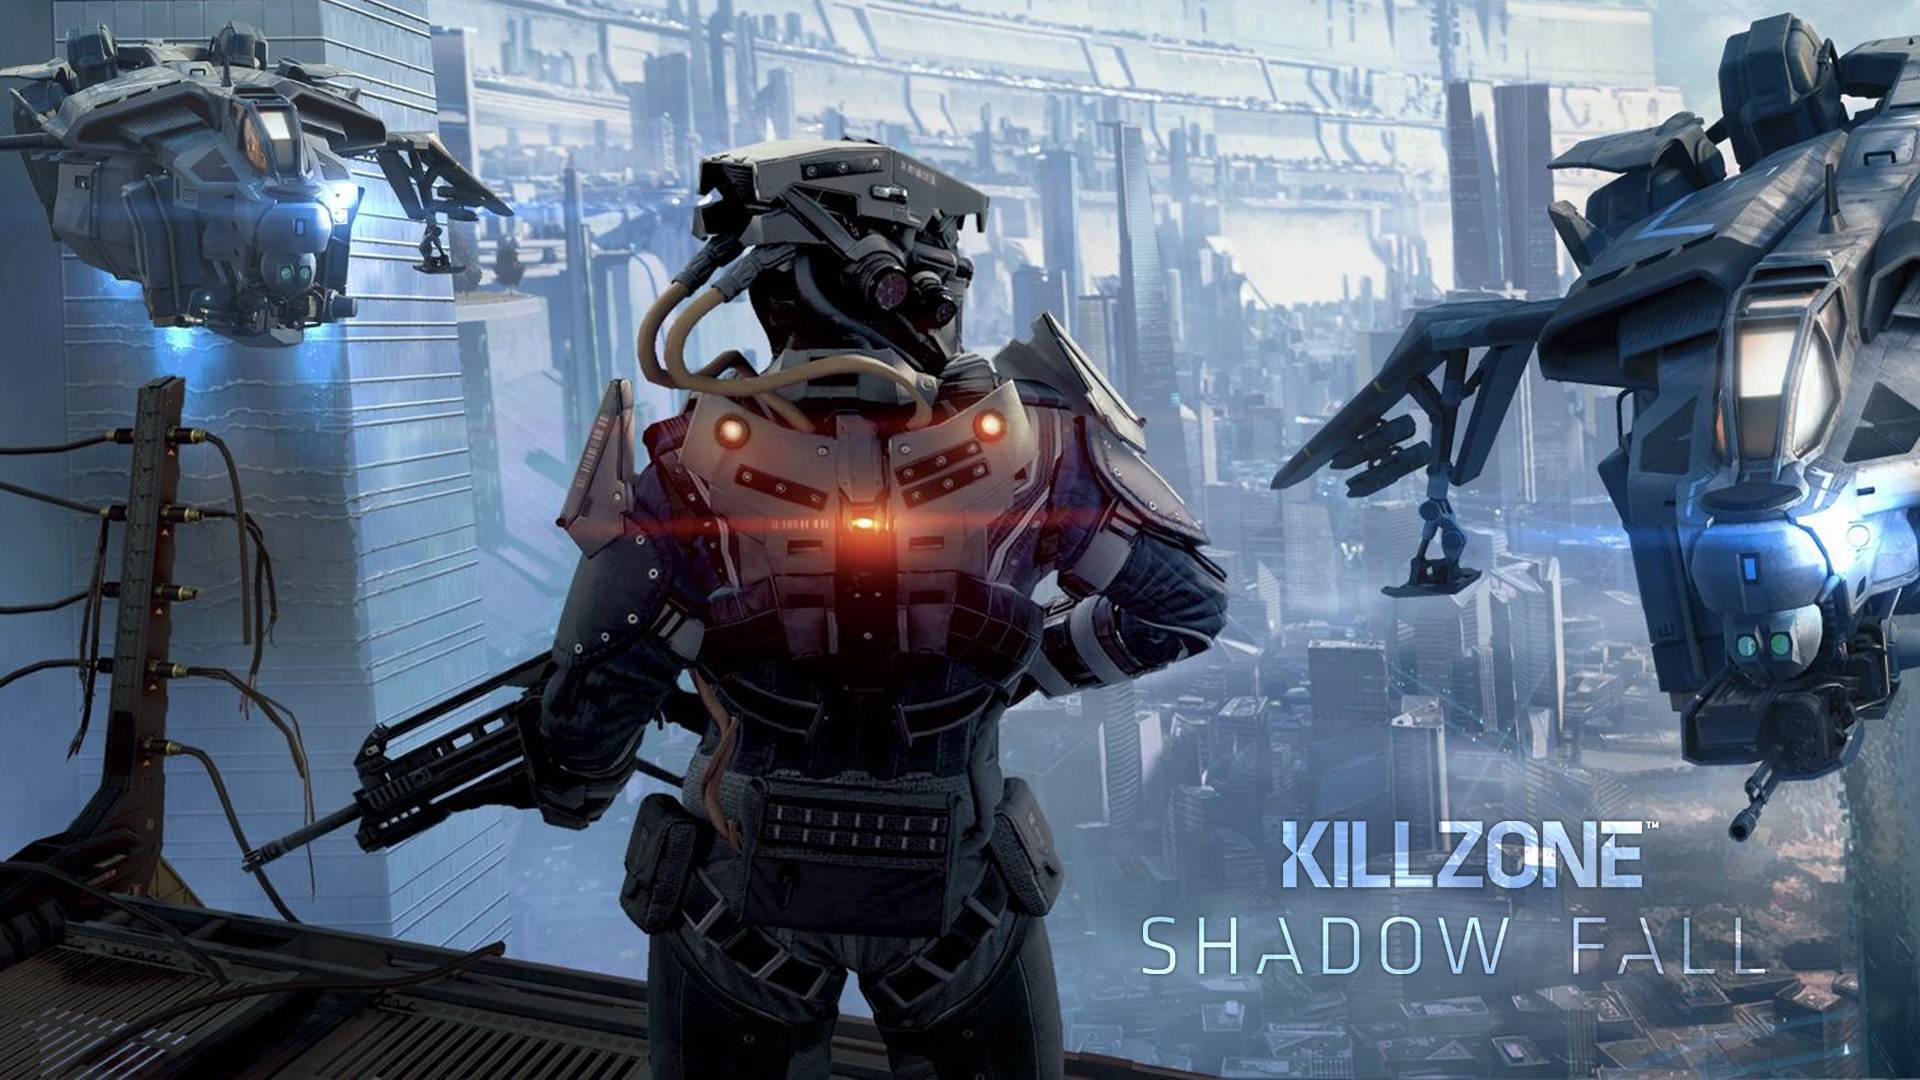 The event of Killzone: Shadow Fall is set 30 years after Killzone 3 and it features Helghasts trying to extract revenge on the ISA.